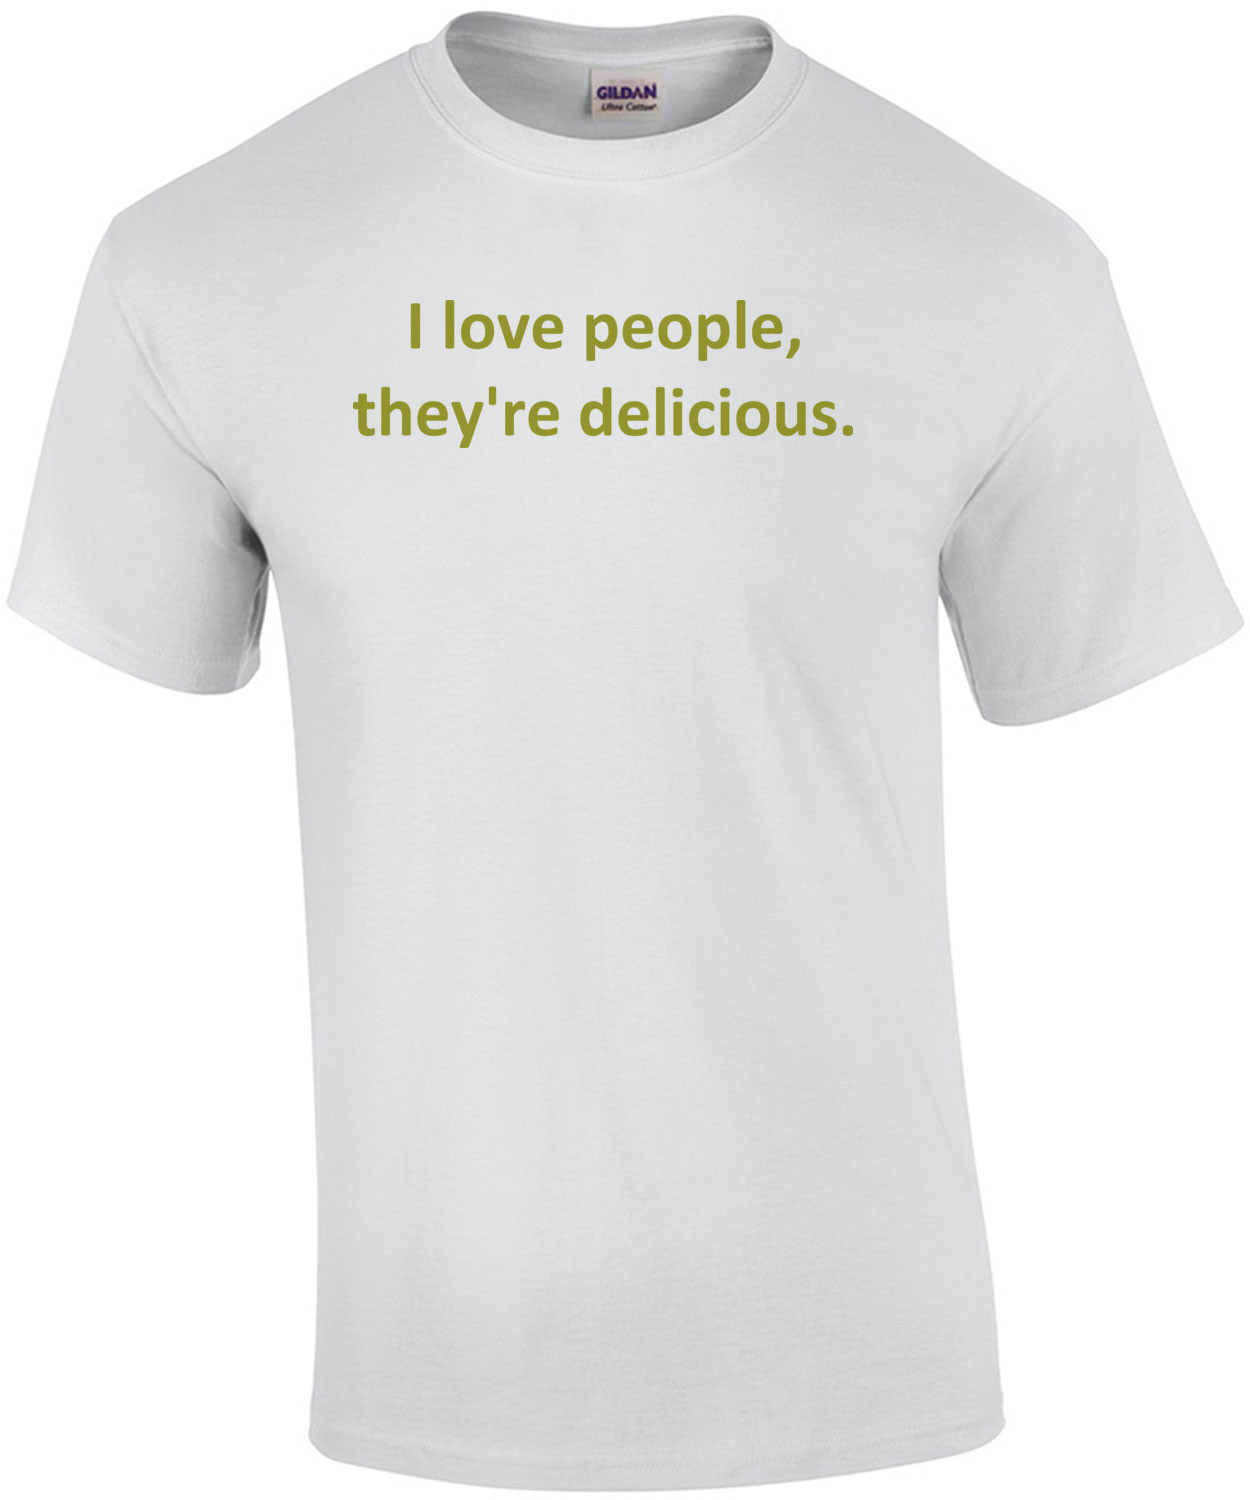 I love people, they're delicious. Shirt